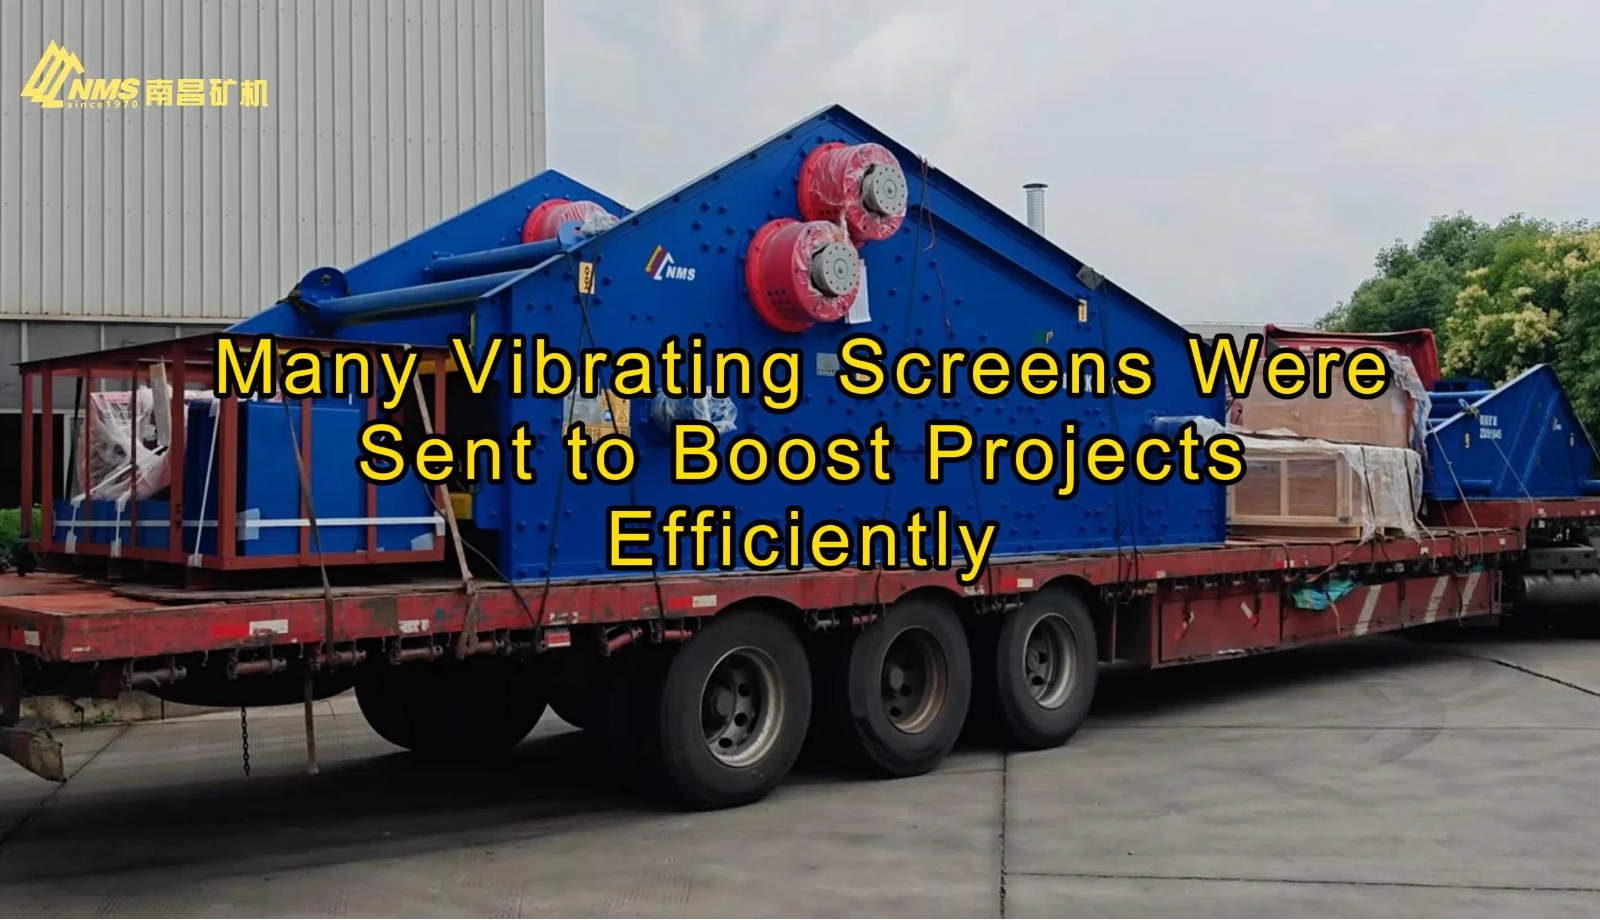 Many Vibrating Screens Were Sent to Boost Projects Efficiently